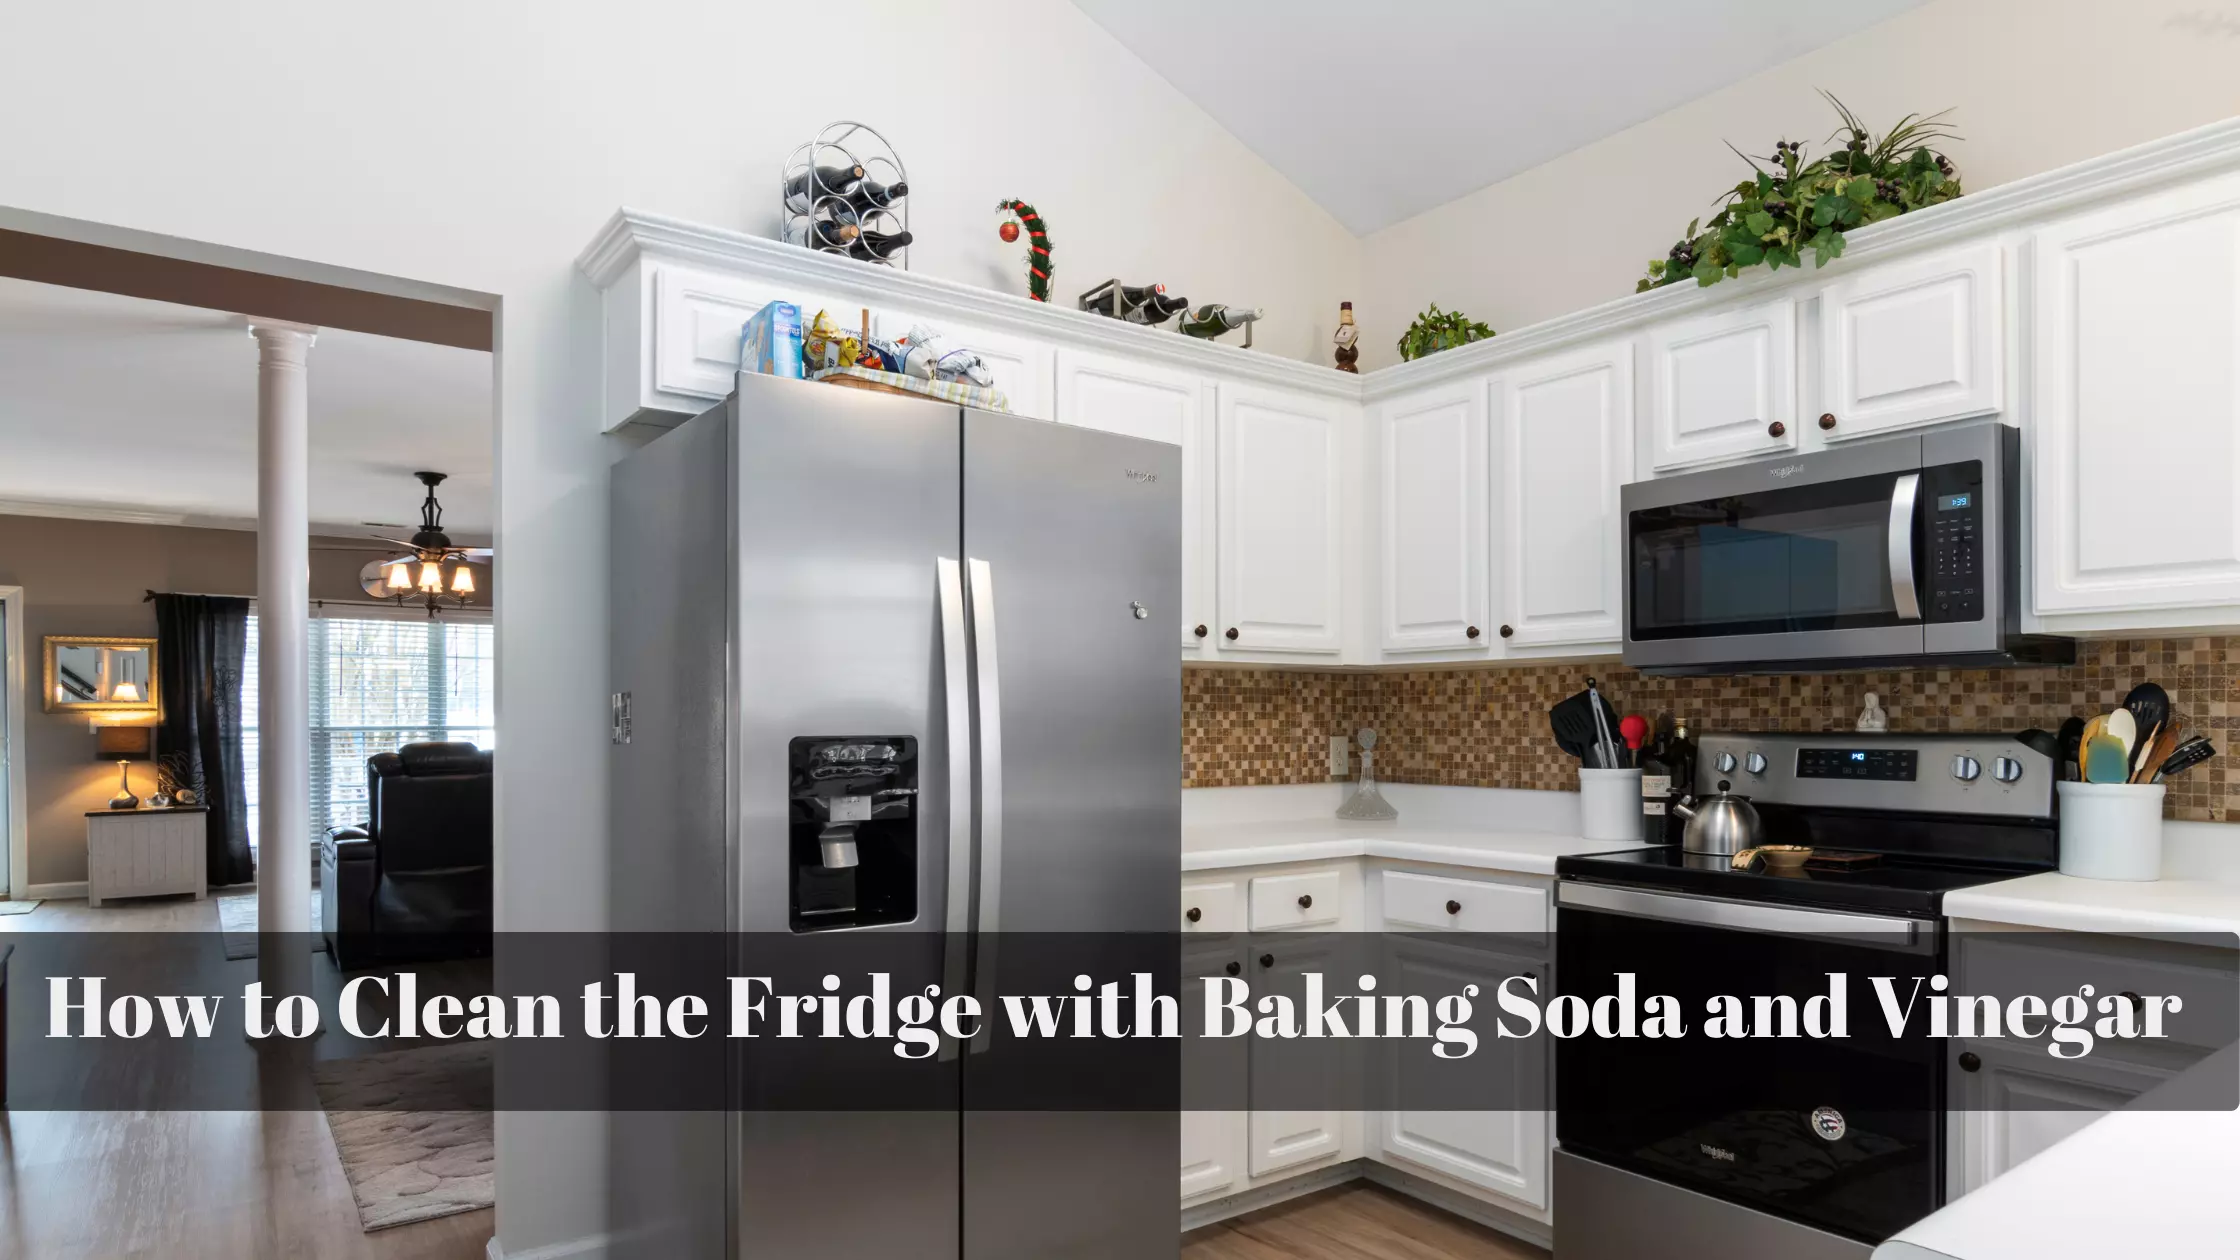 How to Clean the Fridge with Baking Soda and Vinegar